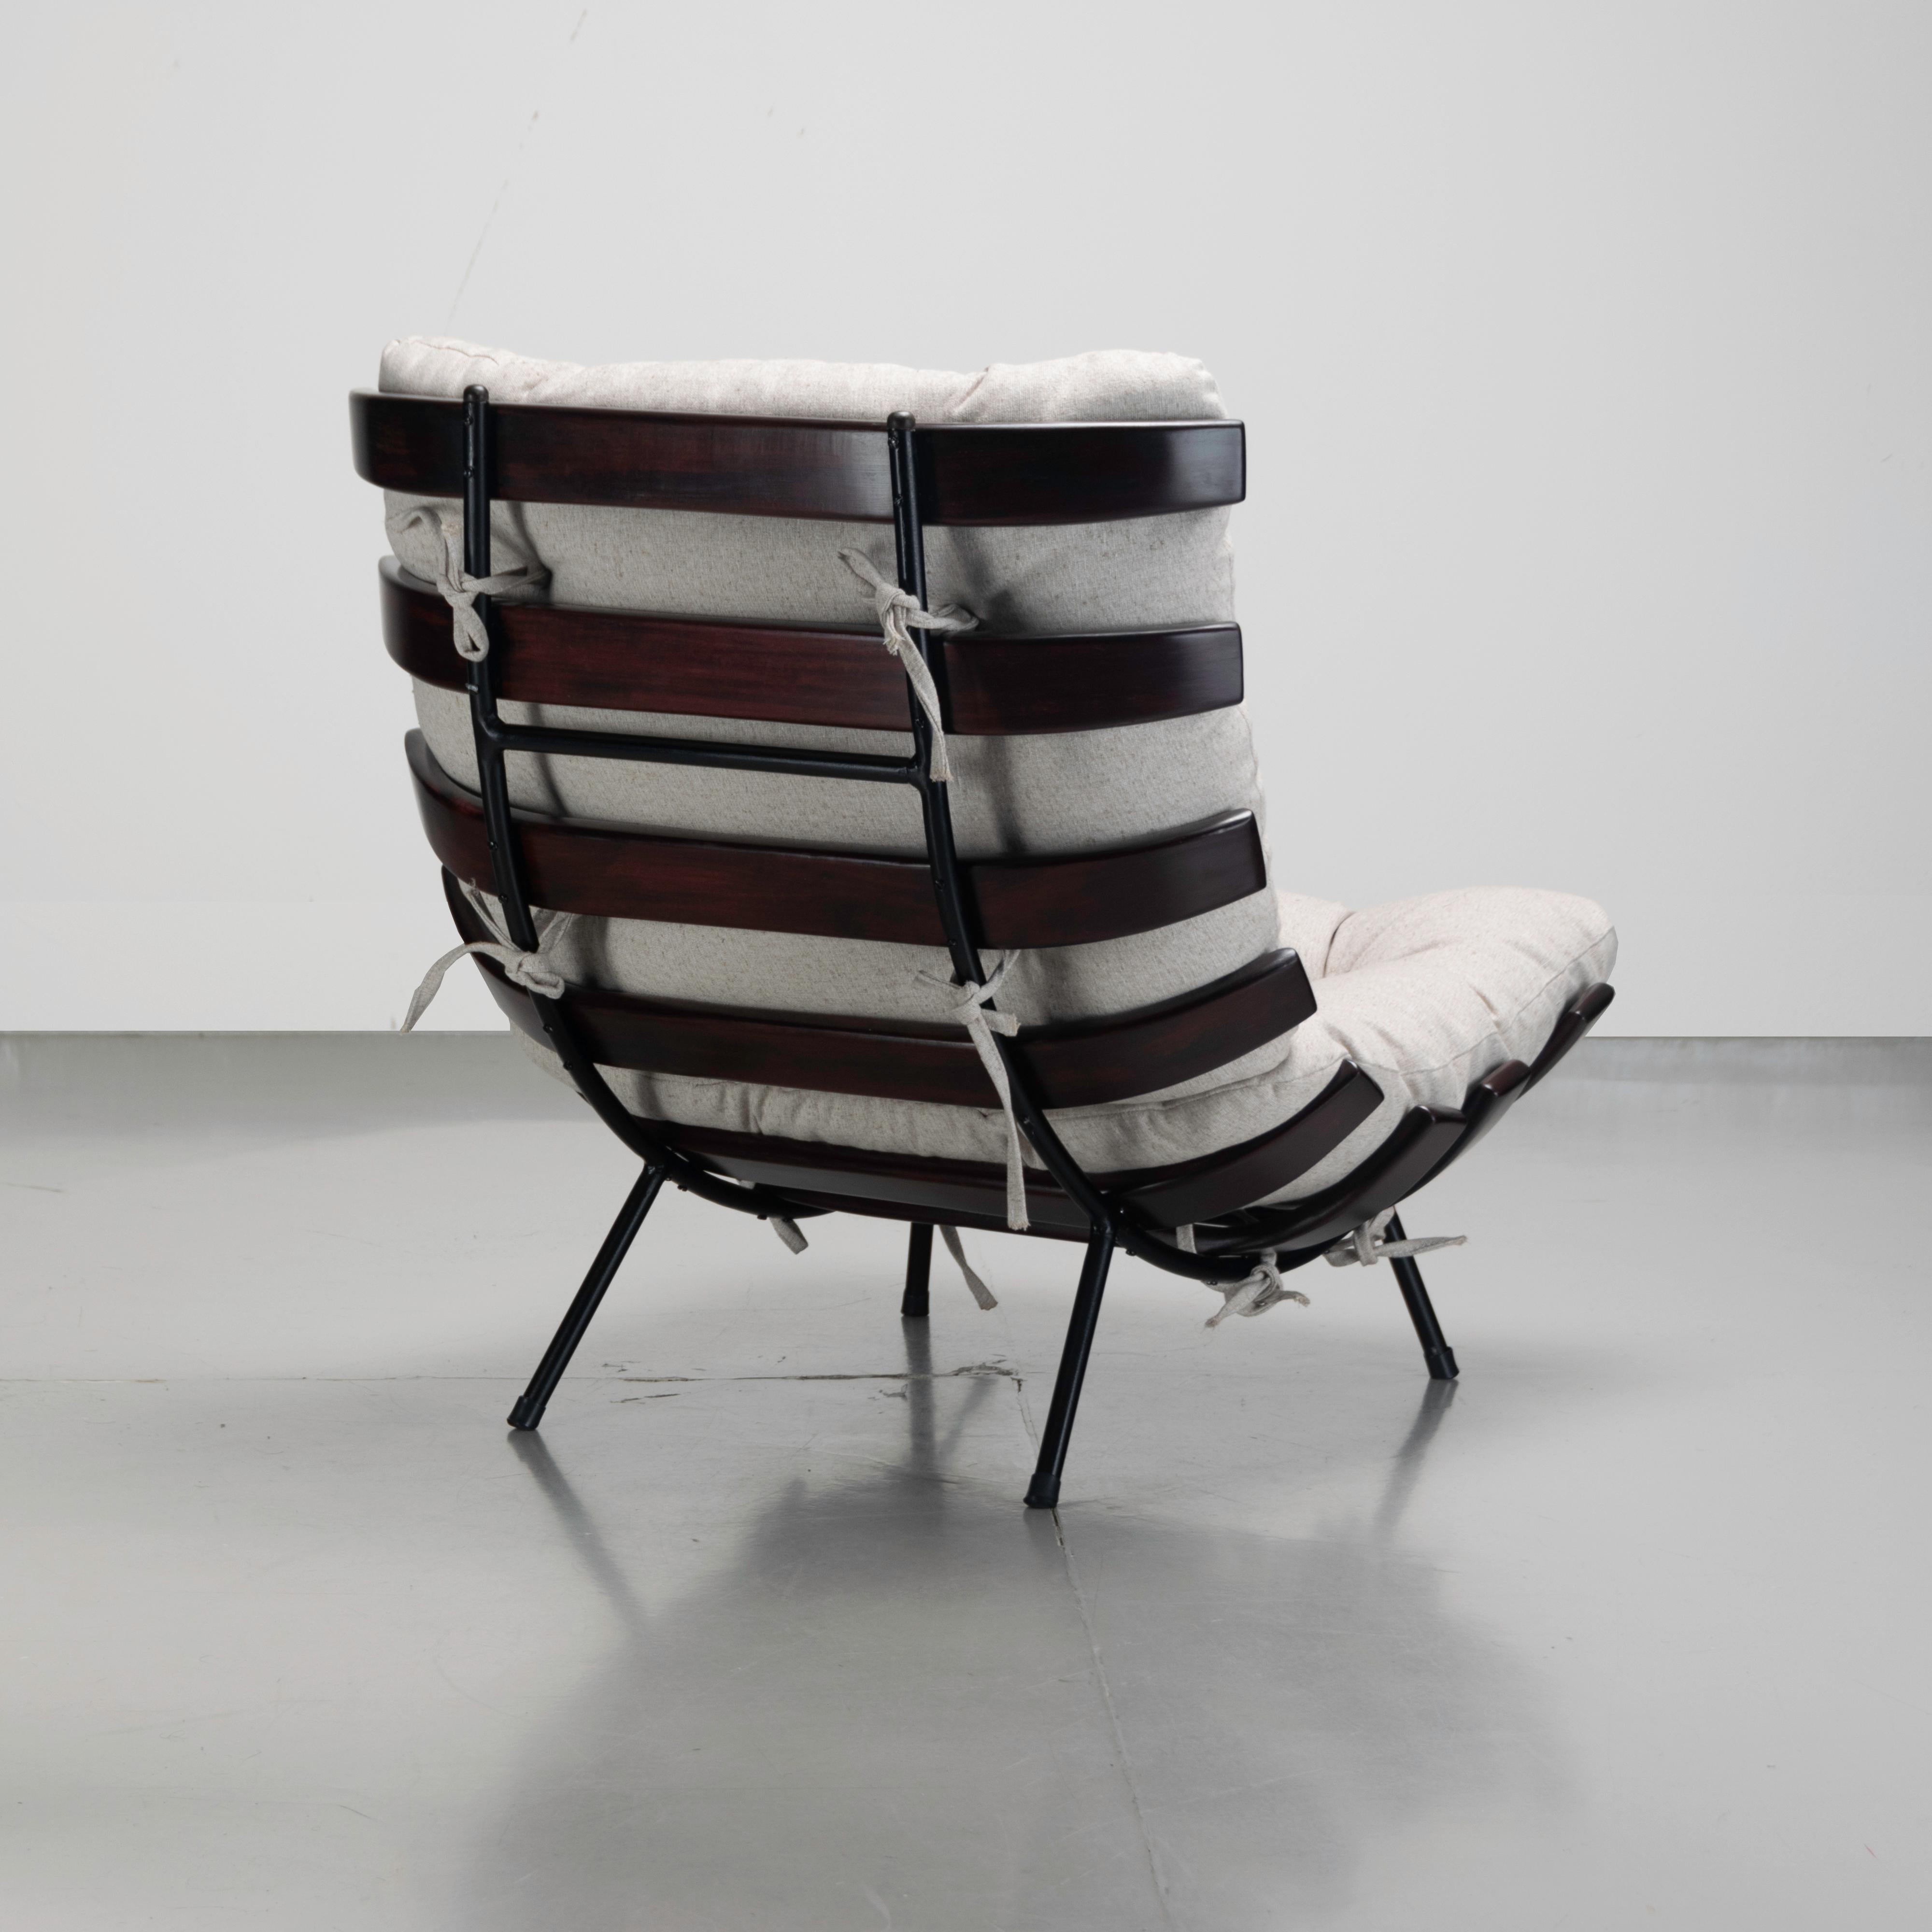 Rib chair (also called Costela chair) designed by Martin Eisler and Carlo Hauner in Brazilian hardwood and metal. The chair has been recently reupholstered in off-white linen.

The Costela chair was designed by Martin Eisler in 1953 and manufactured